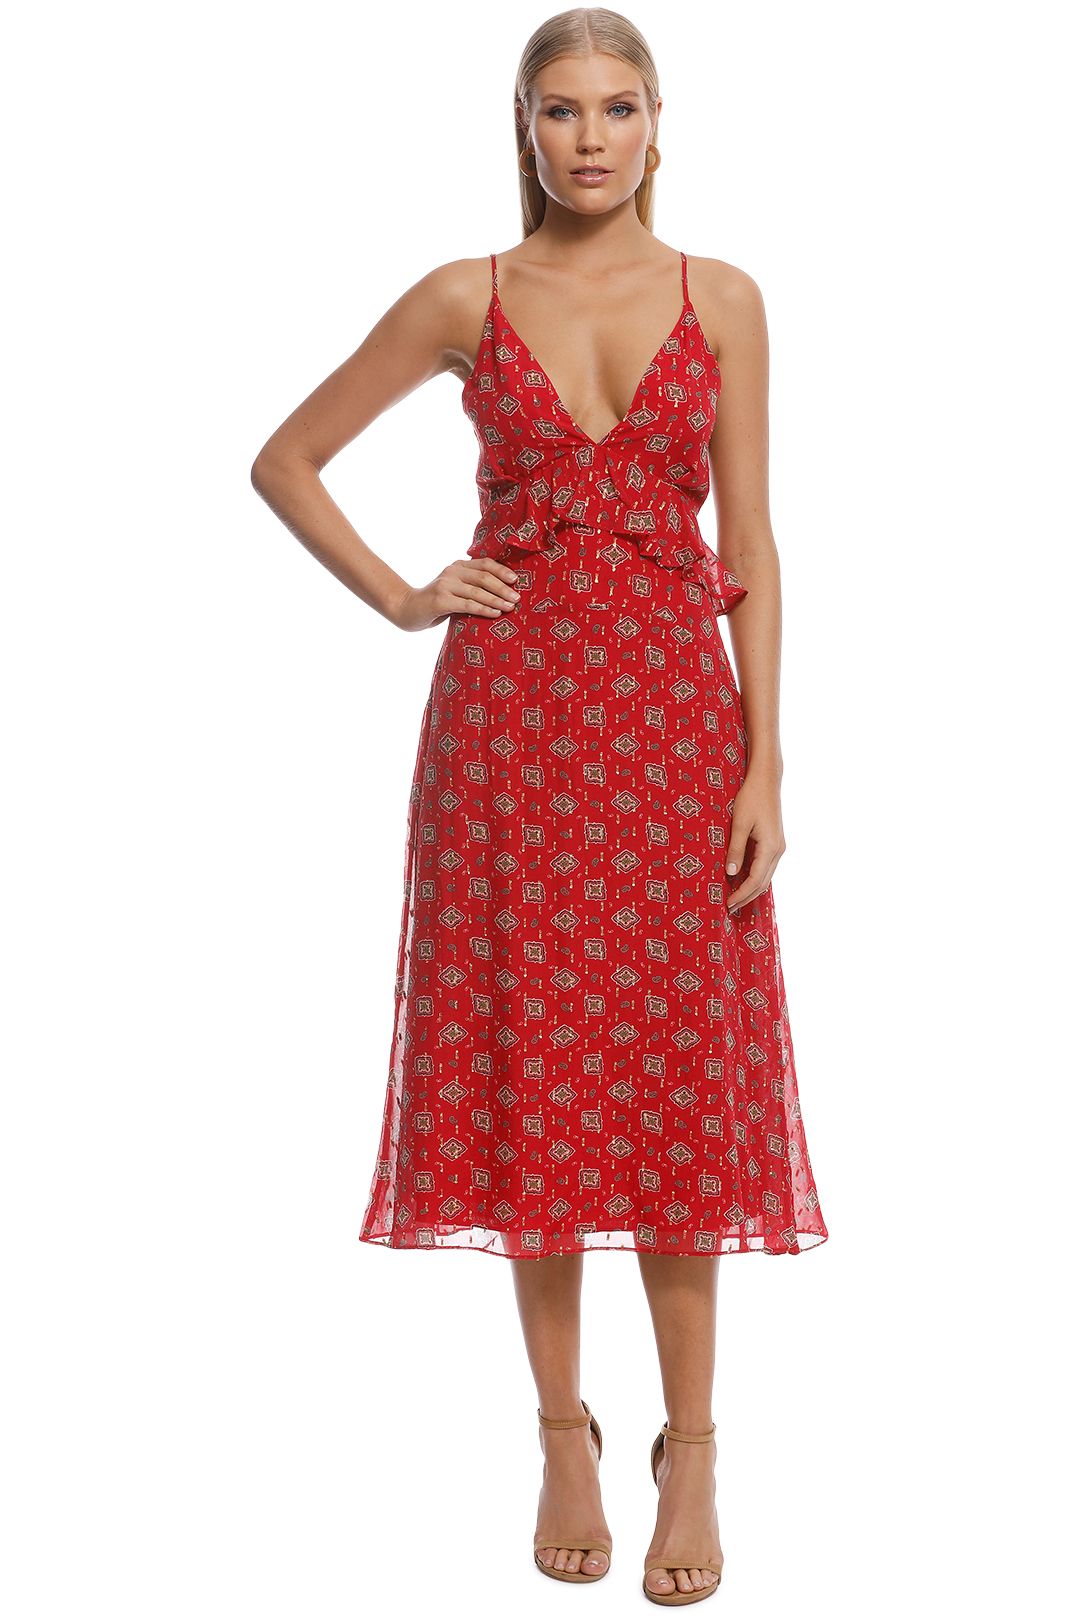 Stevie May - Here We Go Midi Dress - Red - Front